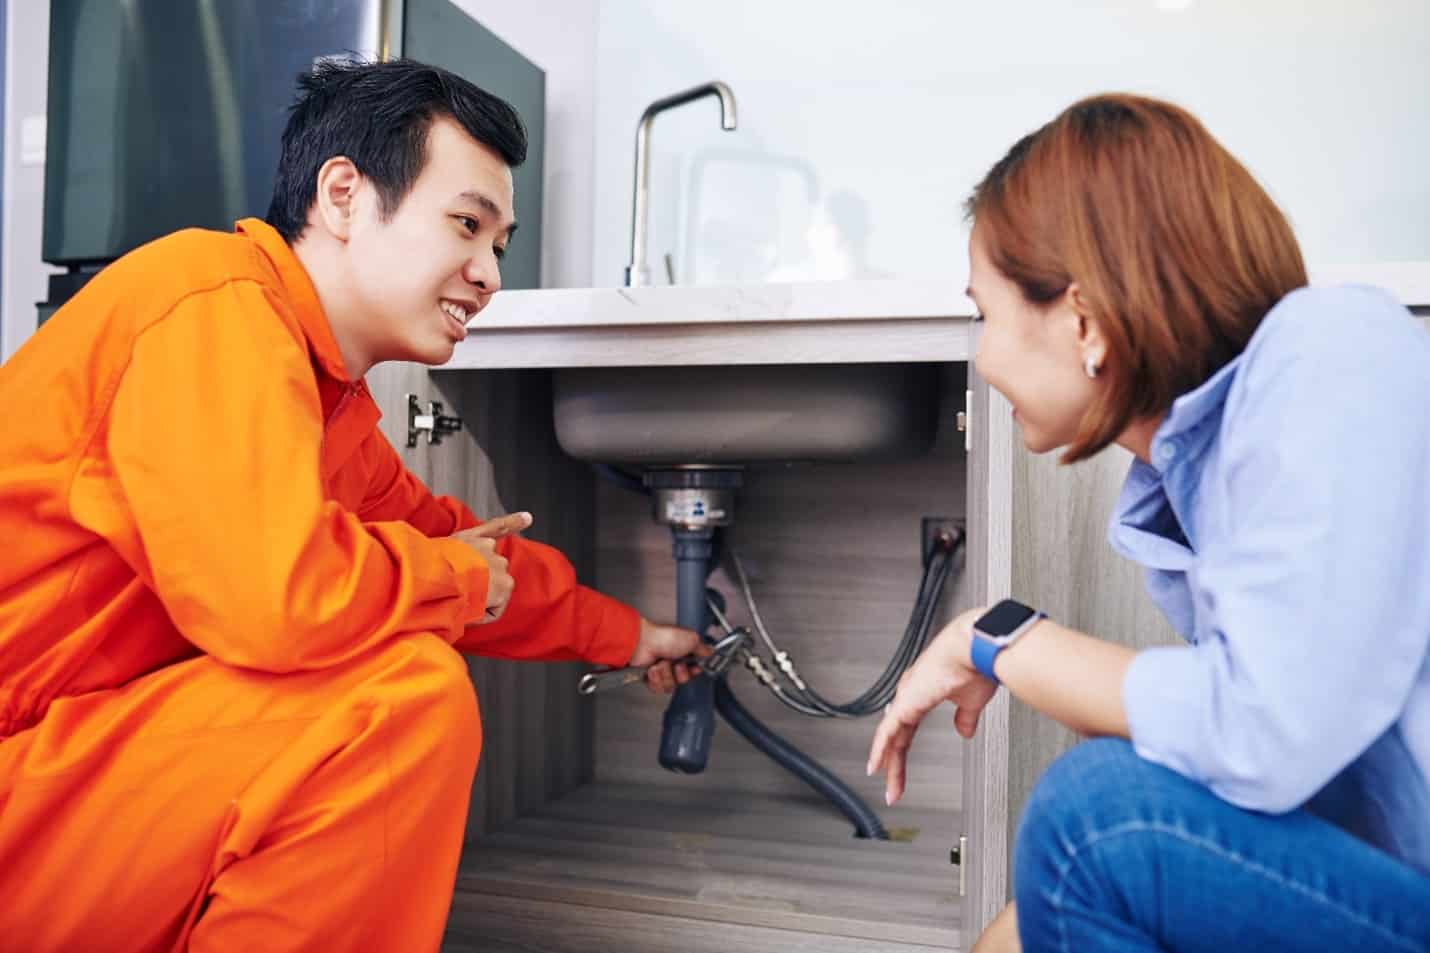 When to Call a Plumber? DIY or Professional Help